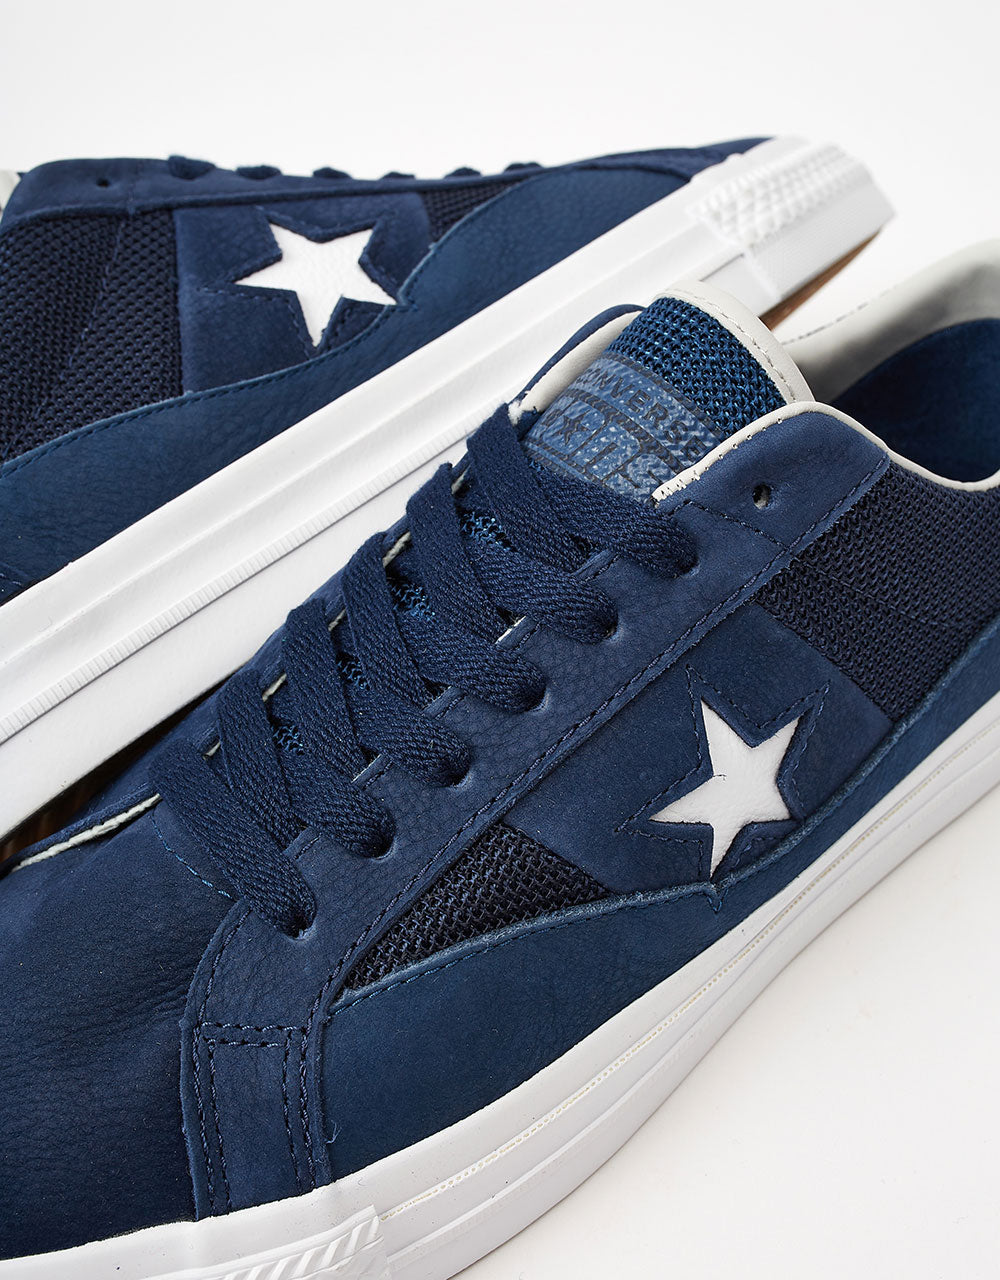 Converse x Alltimers One Star Pro Skate Shoes - Midnight Navy/Navy